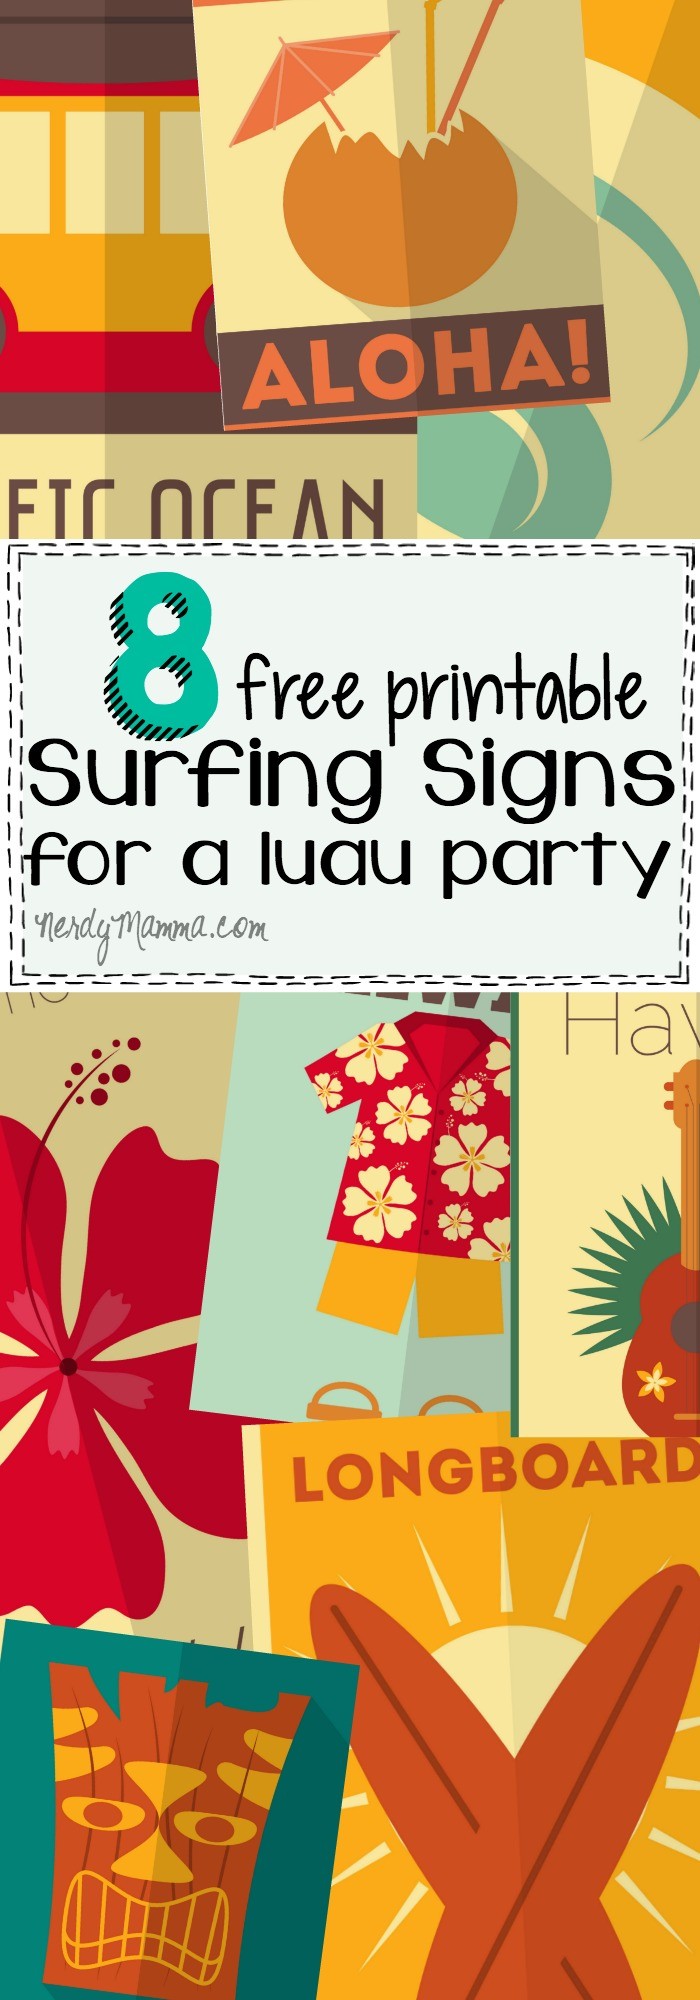 8 Free Printable Surfing Signs For A Luau Party Nerdy Mamma Printables